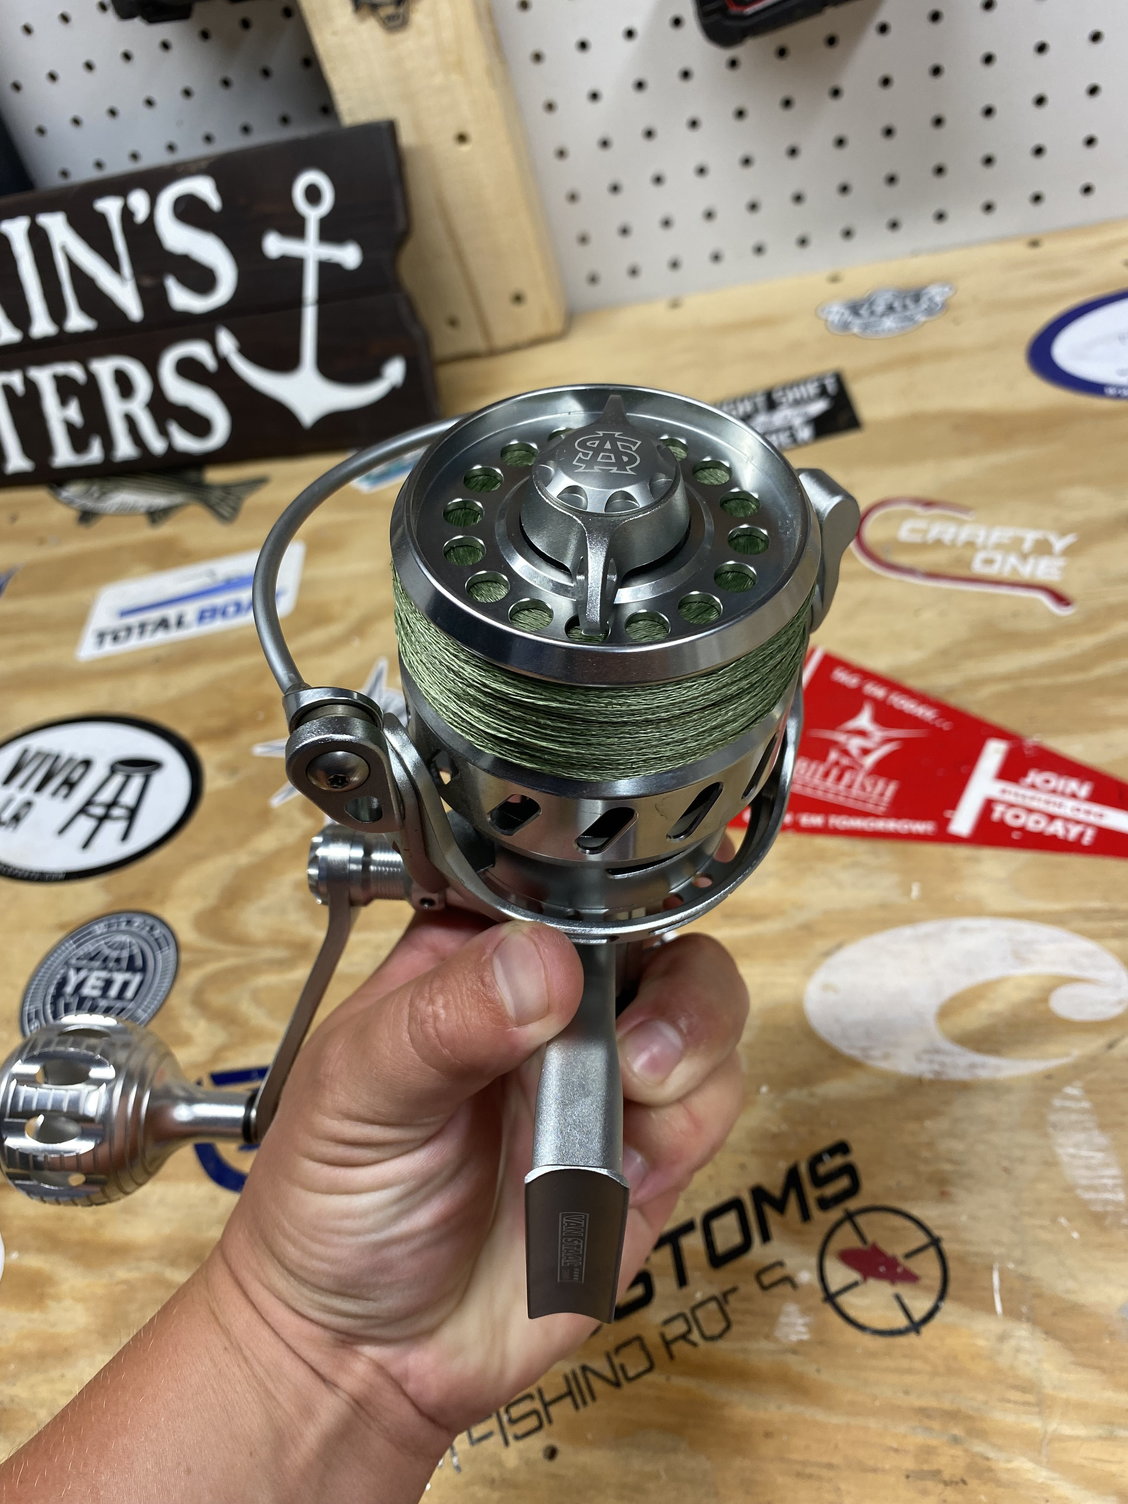 Van staal vr200- like new + power knob - The Hull Truth - Boating and  Fishing Forum